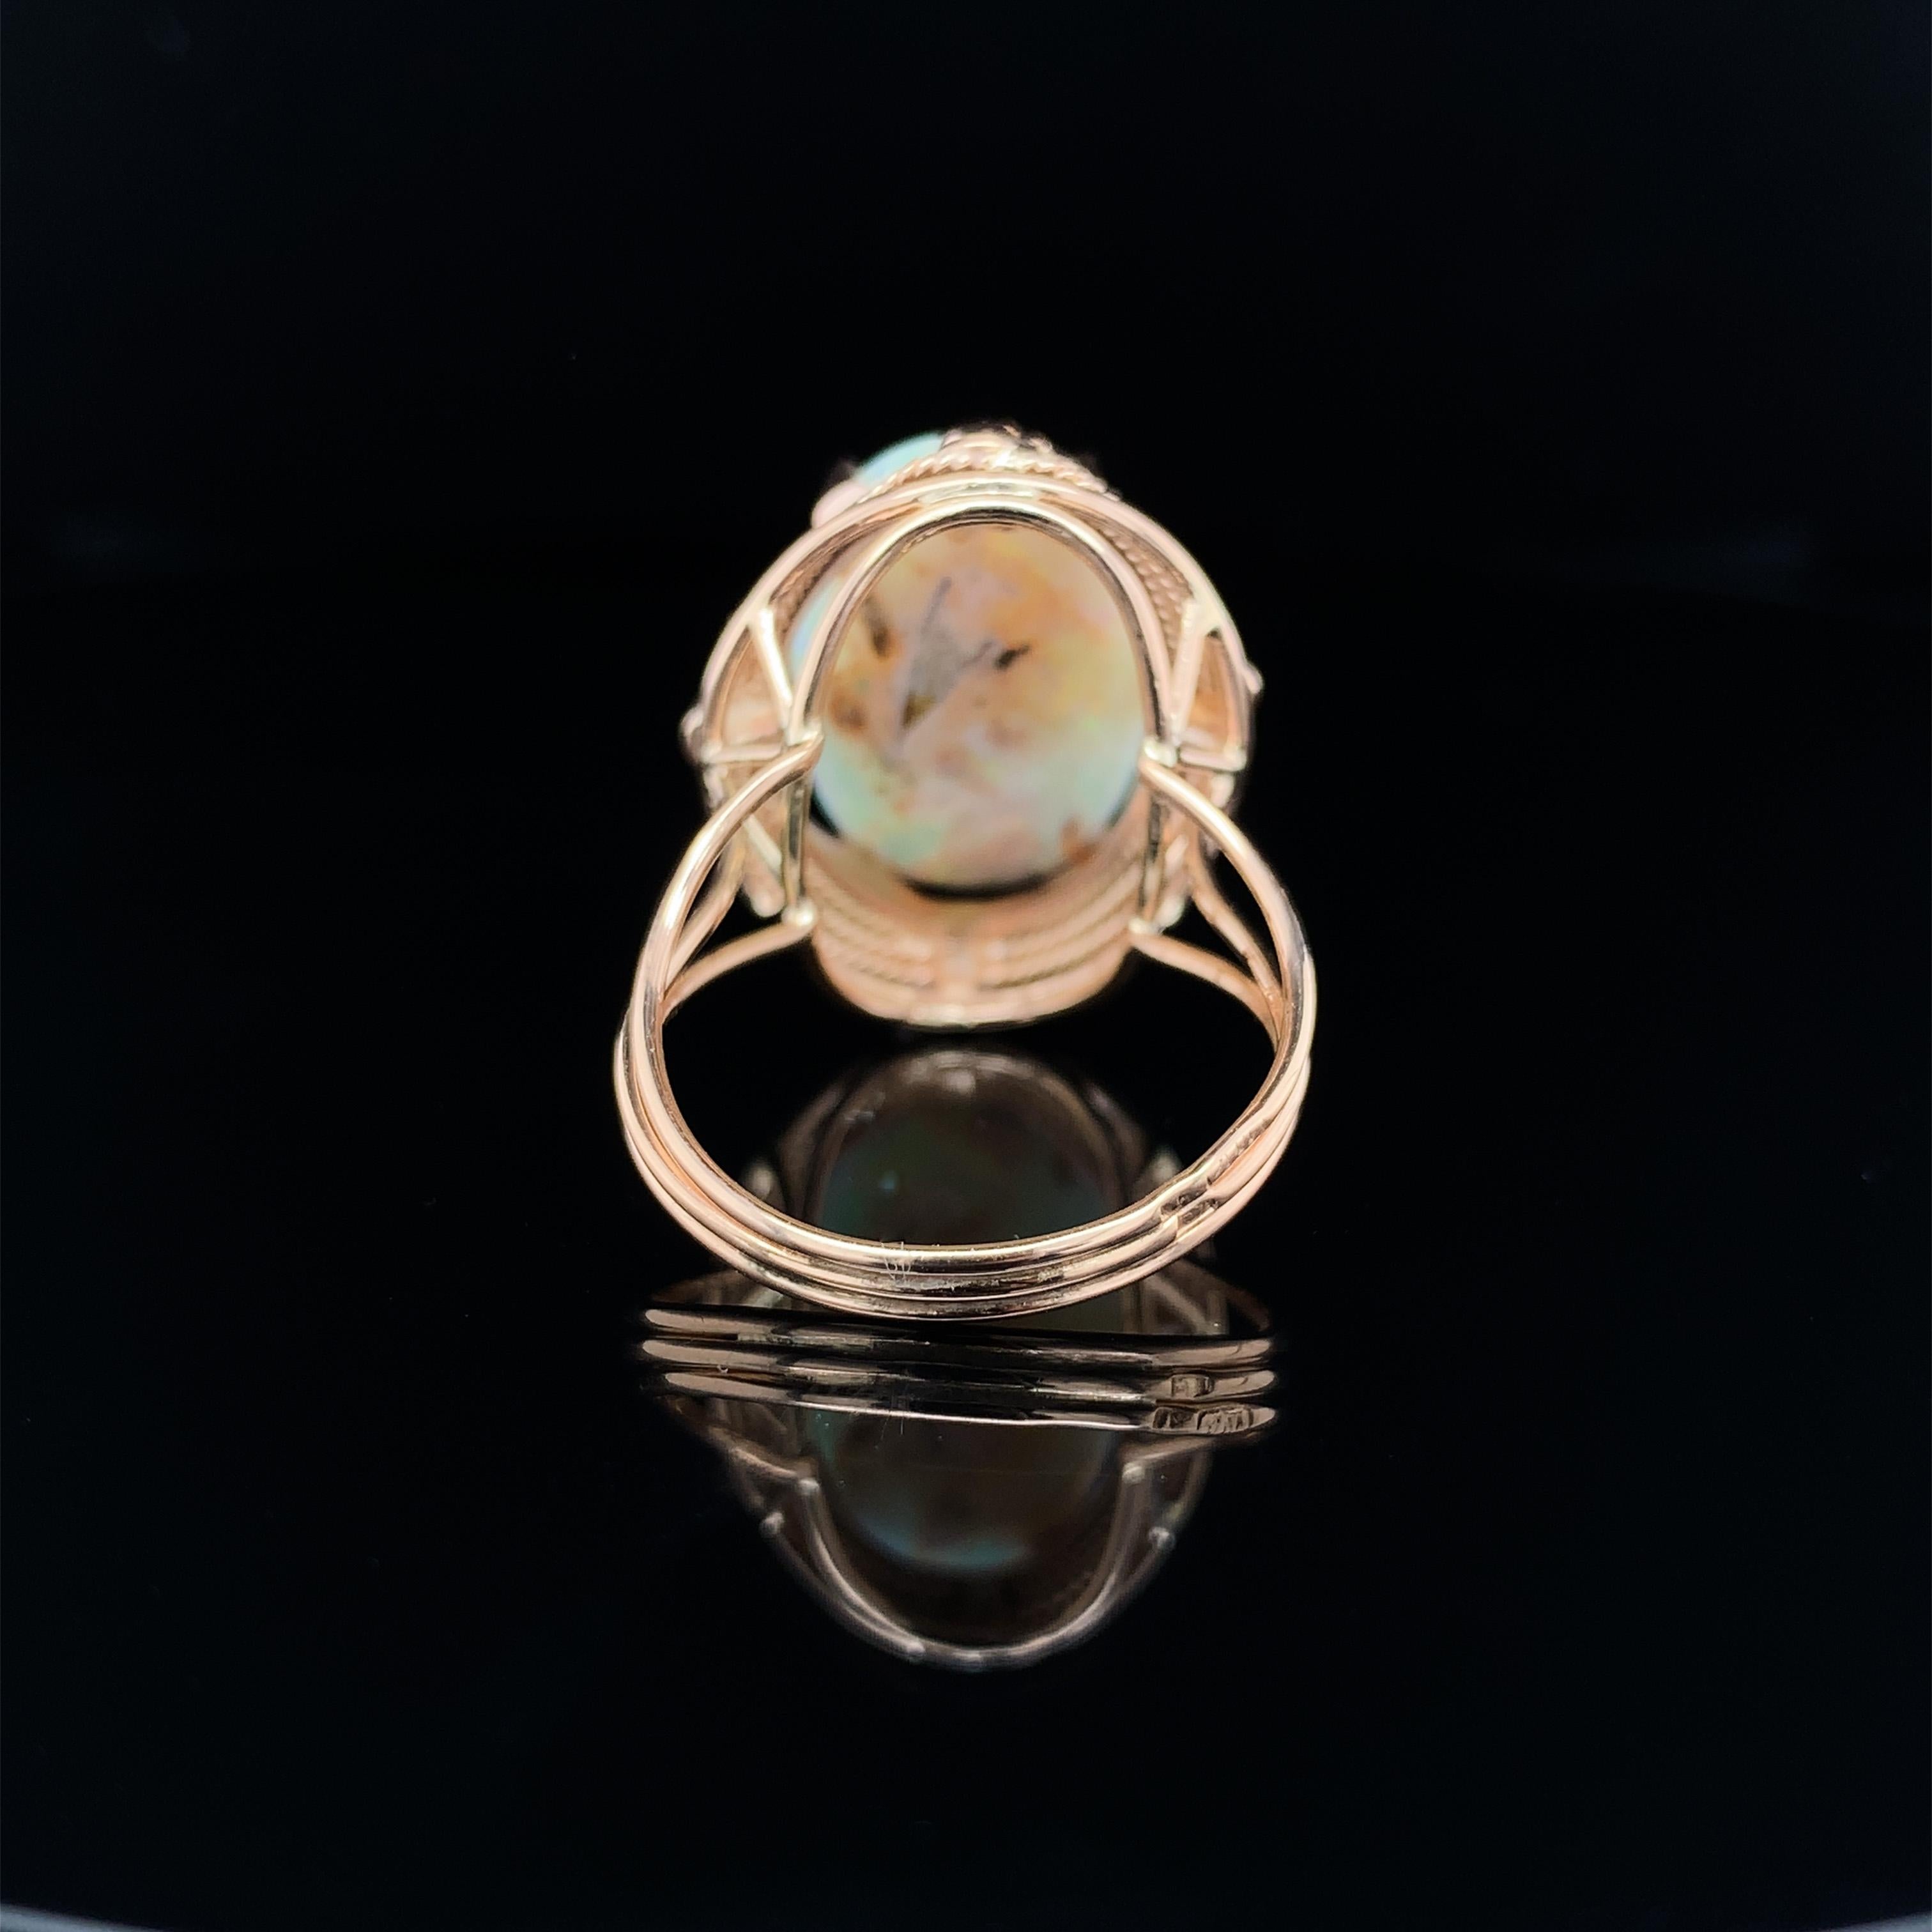 Women's 14K Rose Gold Hand Wrought Ring with a large 6.05 carat Australian Opal For Sale